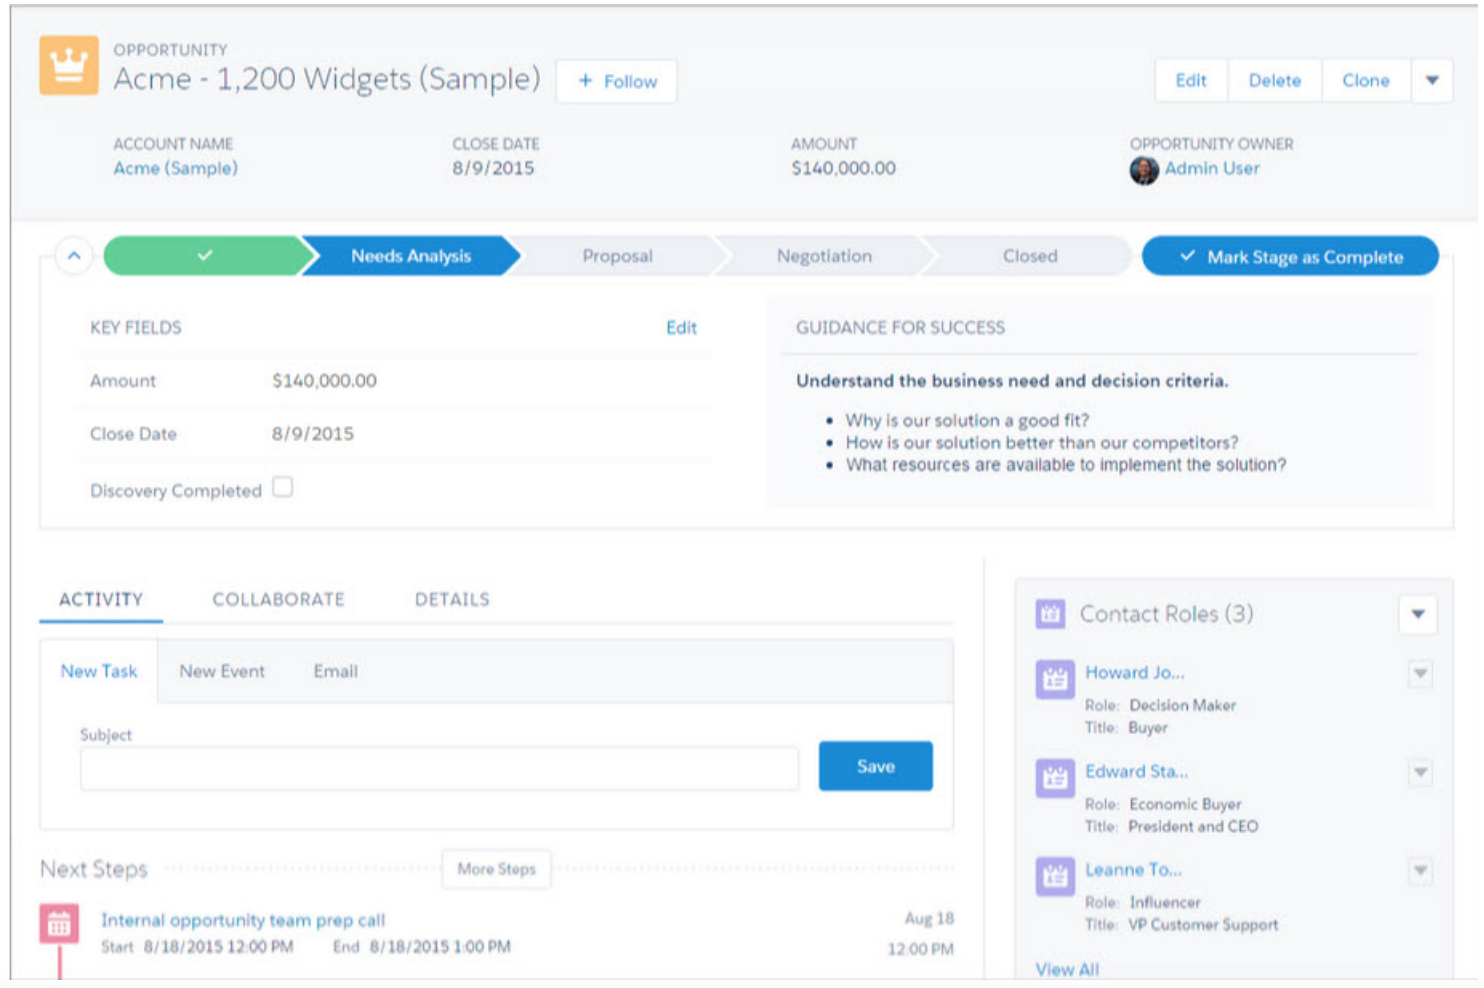 Welcome to the new Salesforce UI - Salesforce Lightning Experience - Fluido